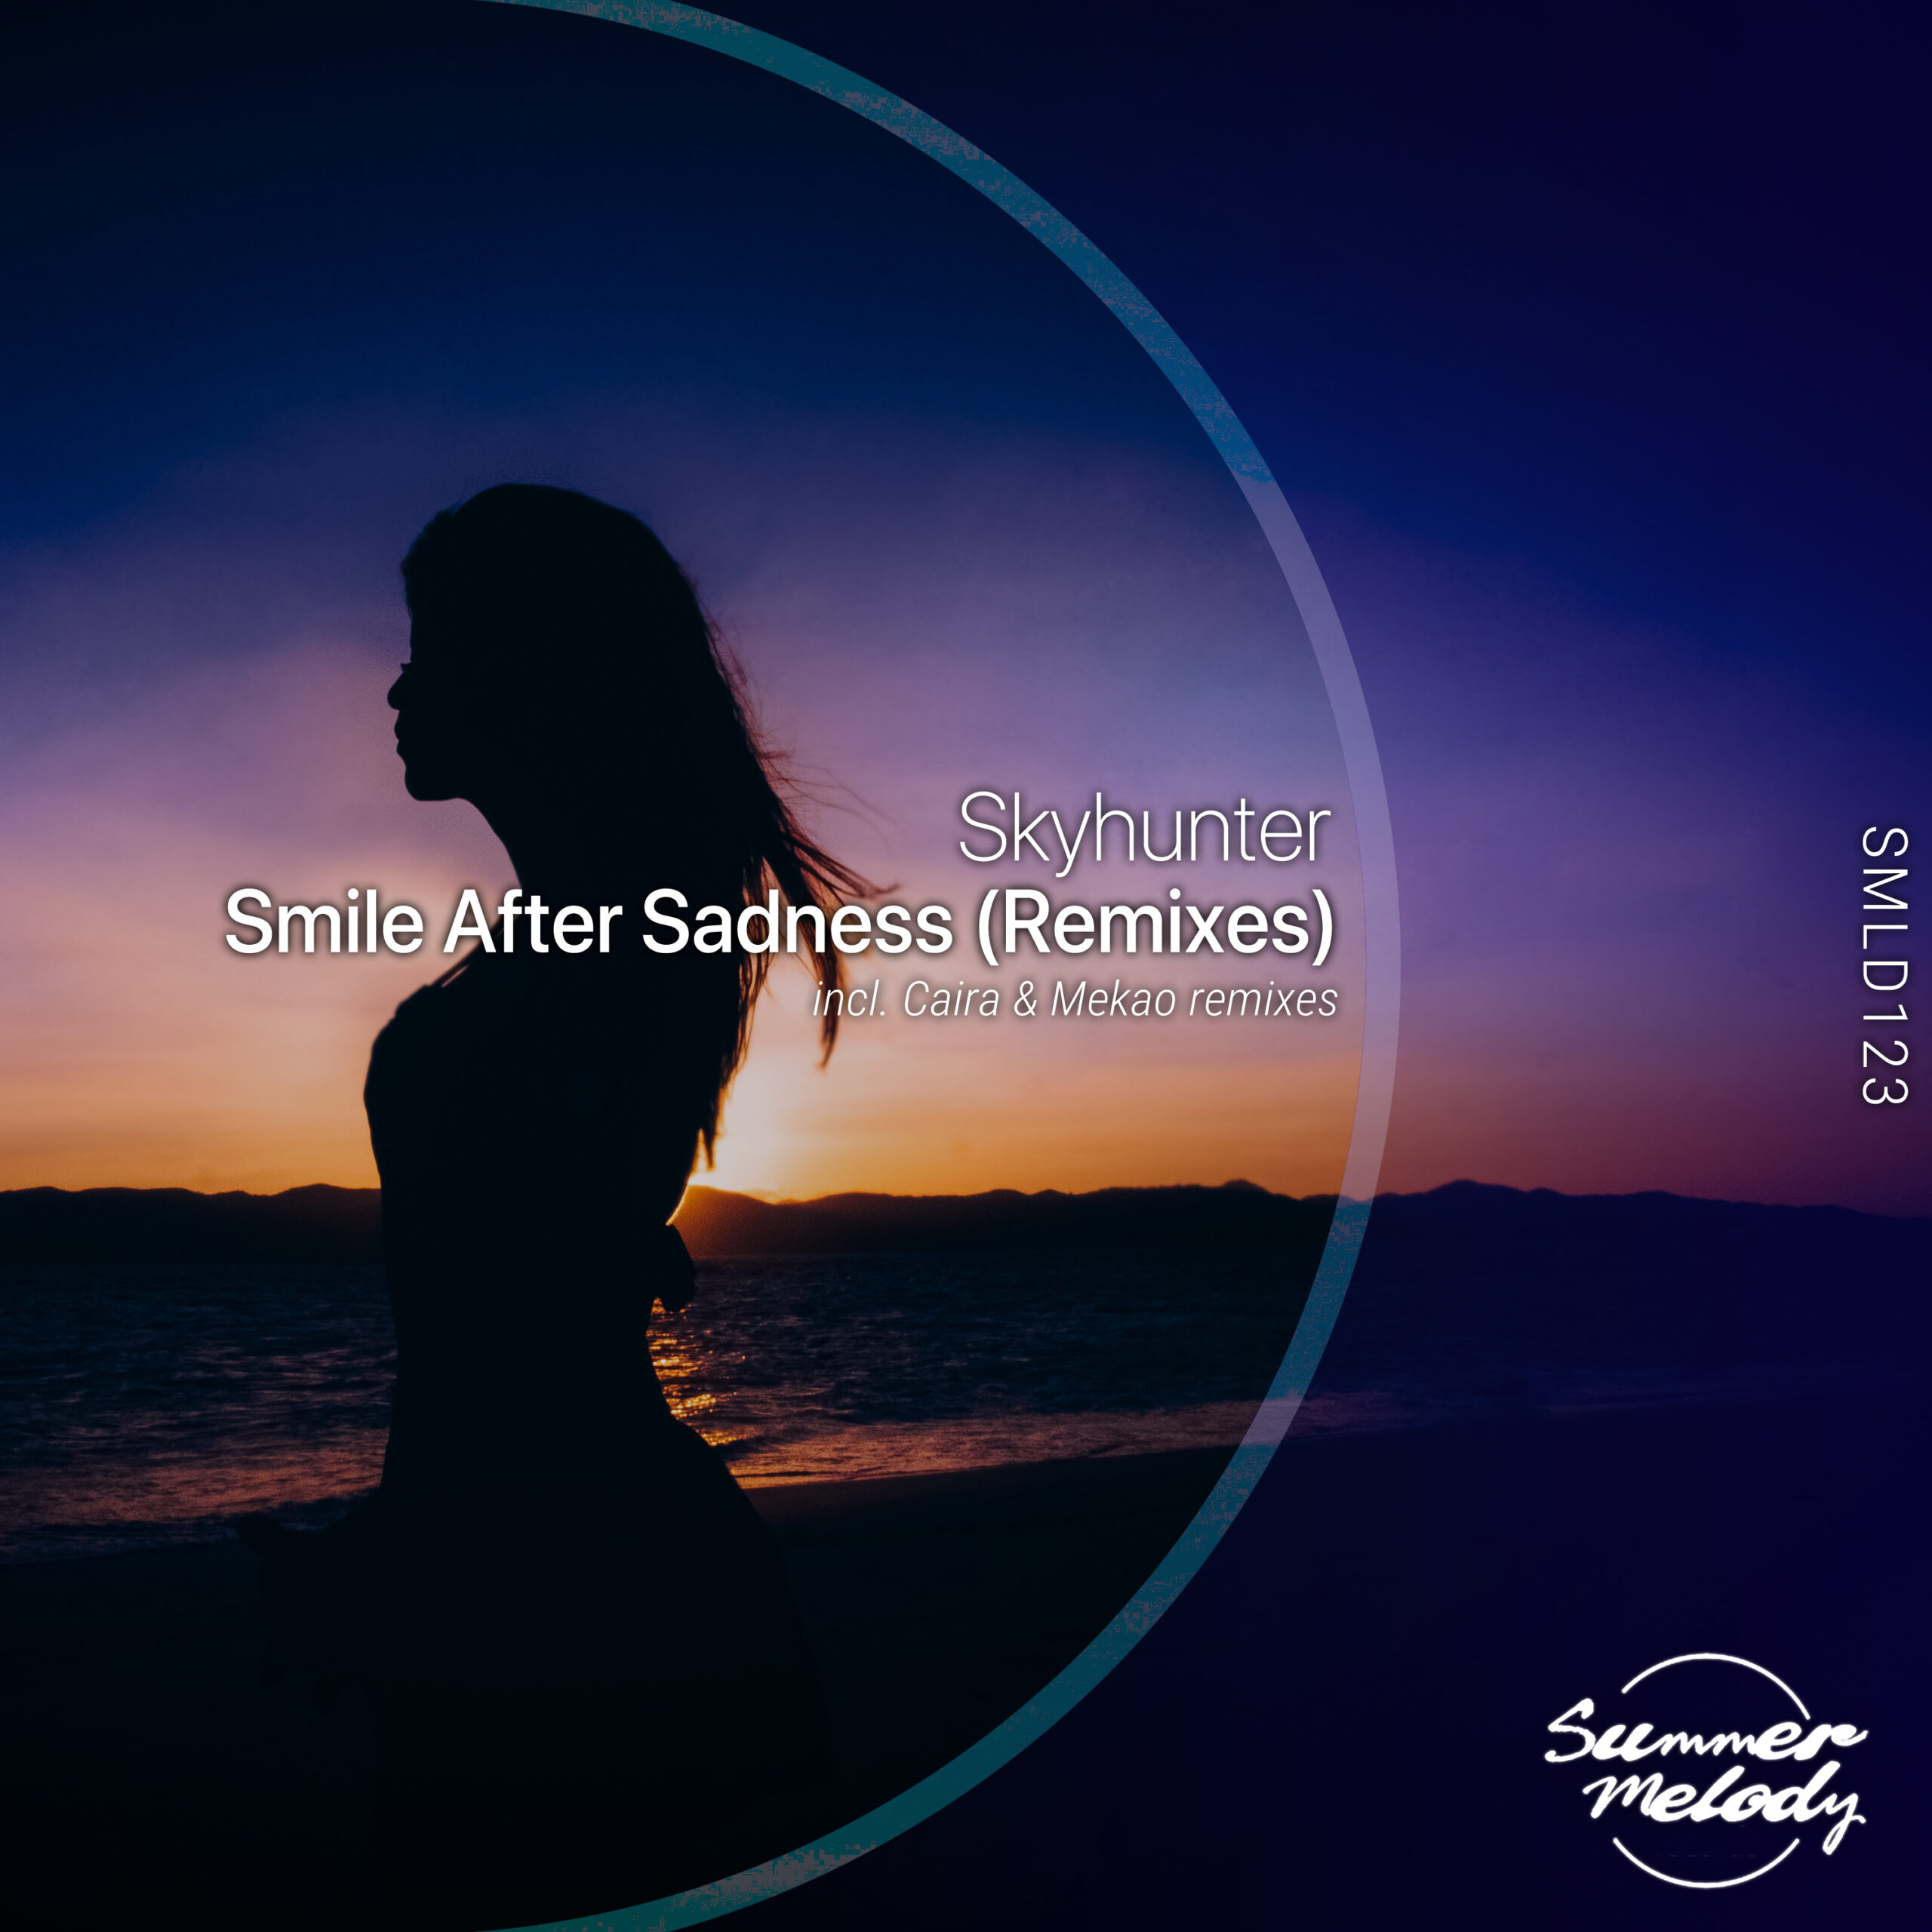 Skyhunter presents Smile After Sadness (Remixes) on Summer Melody Records